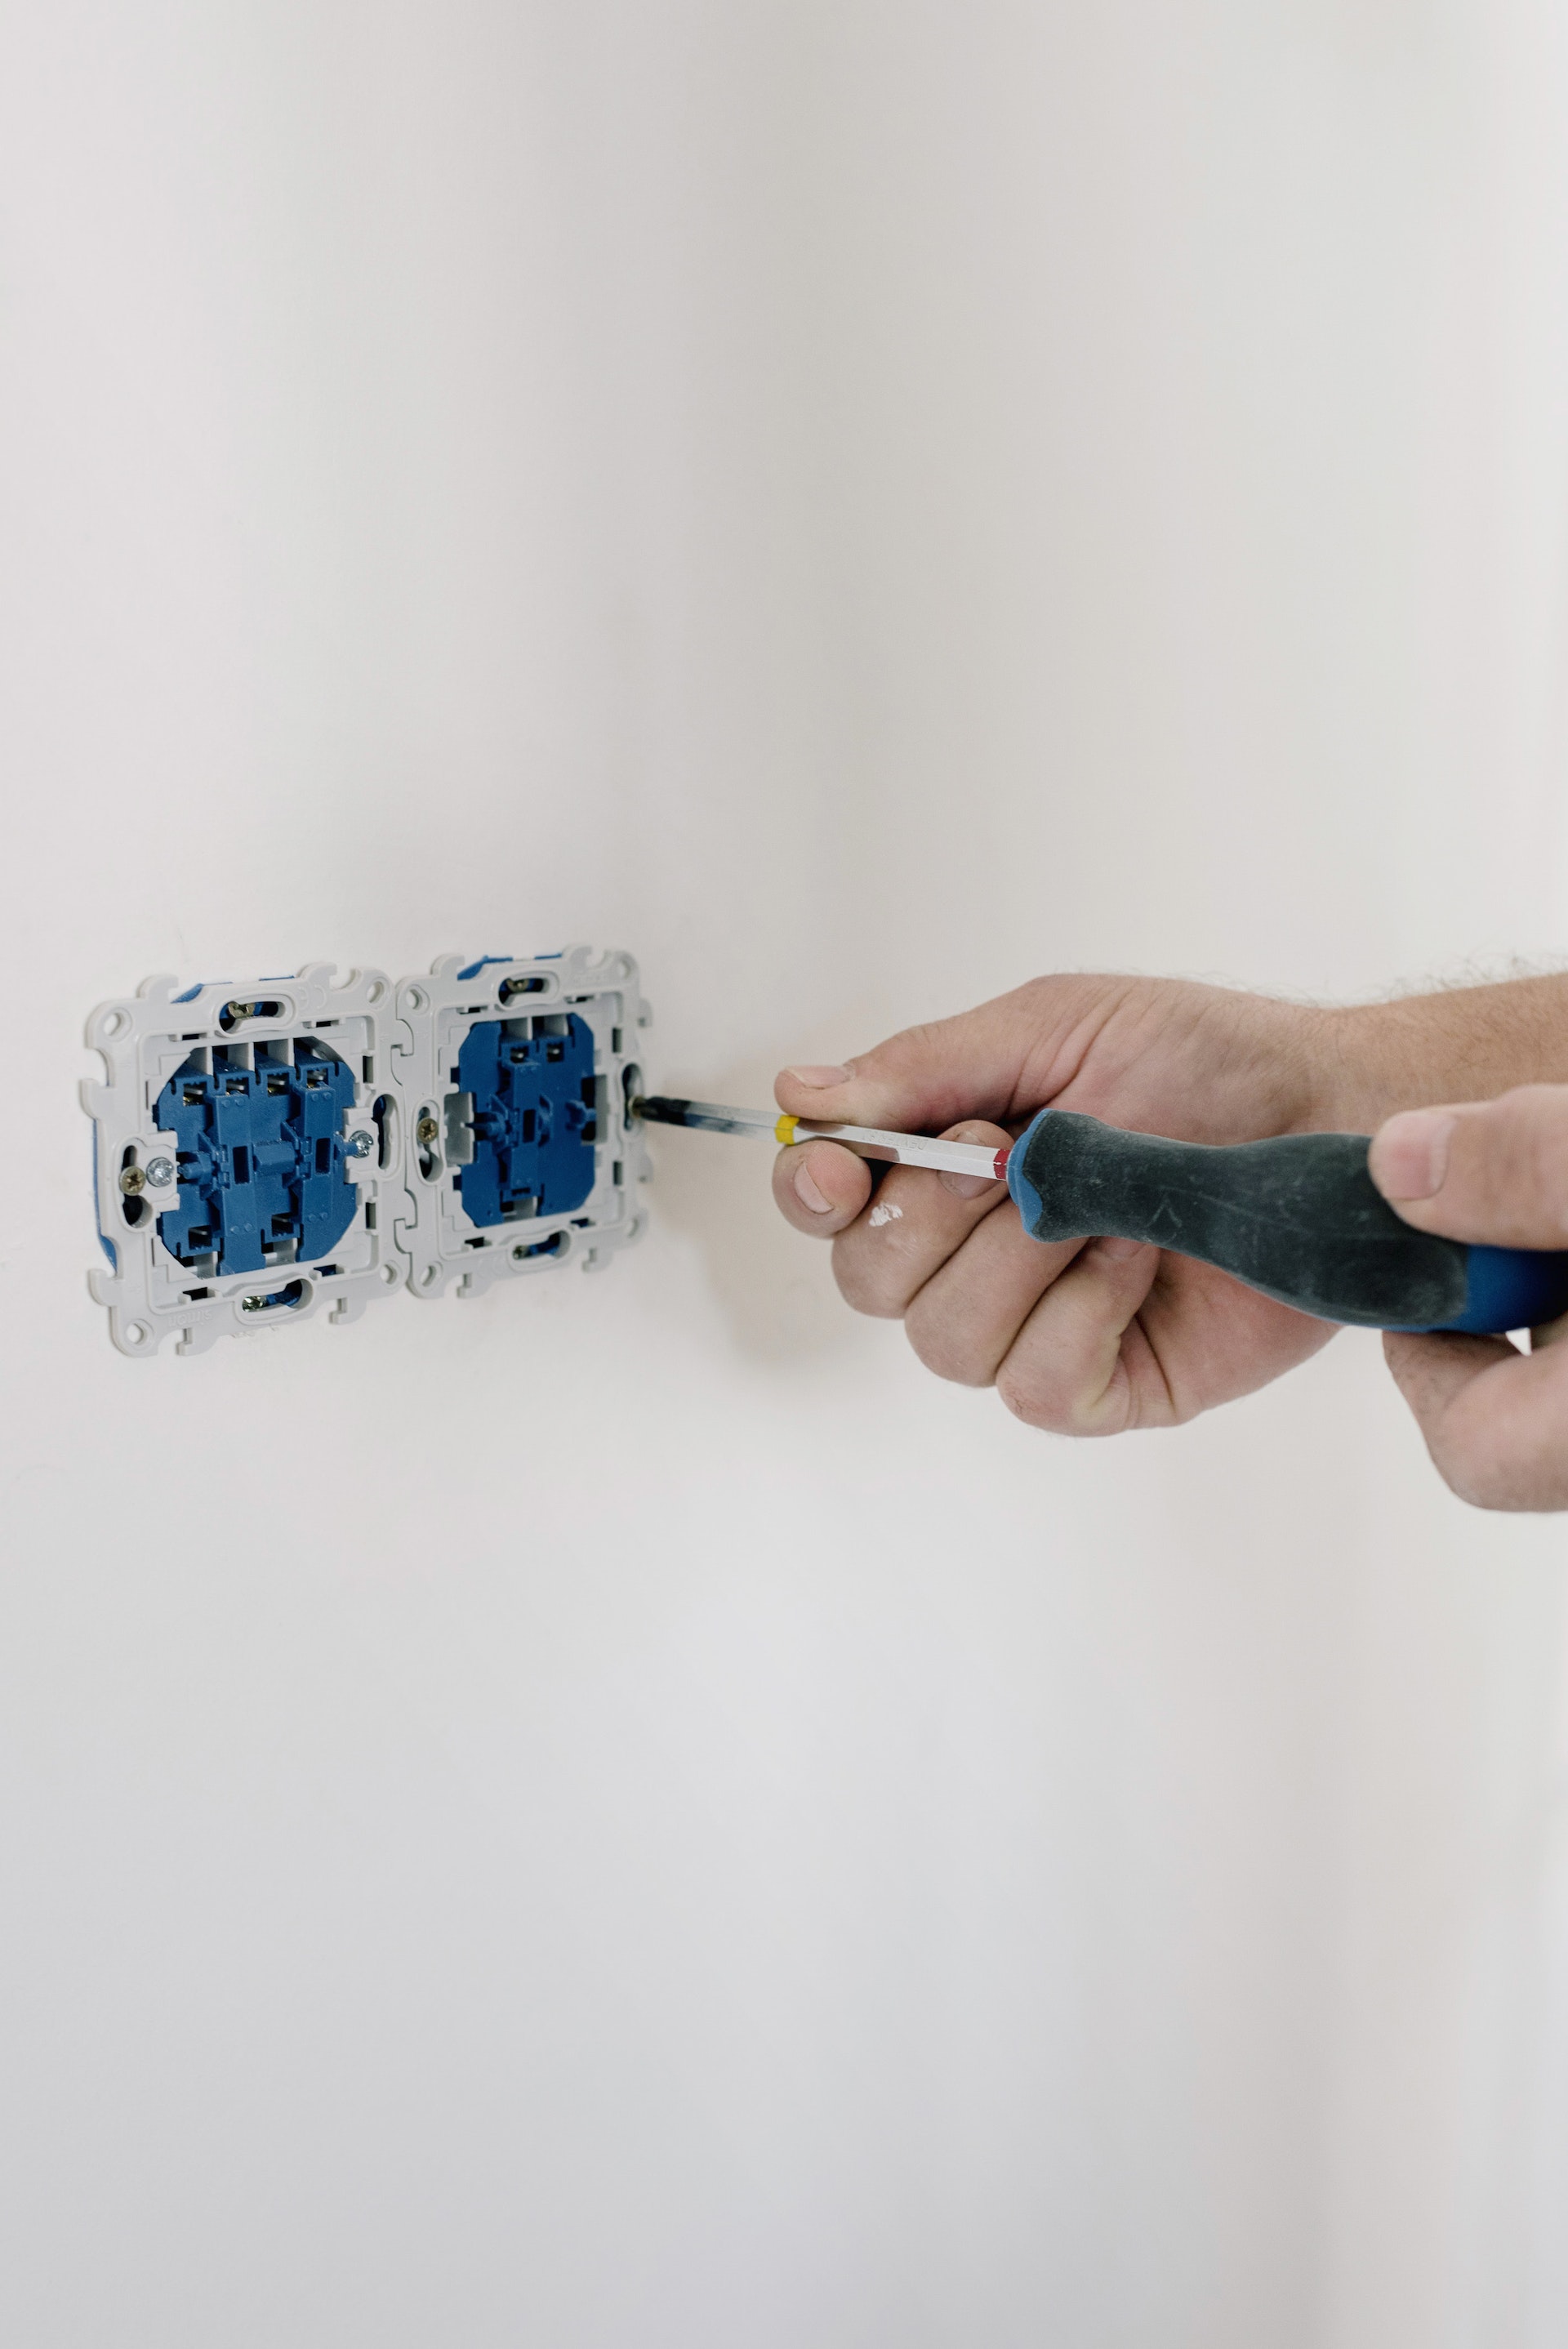 An Electrician Using Screwdriver to Repair the AC Power Plugs and Sockets